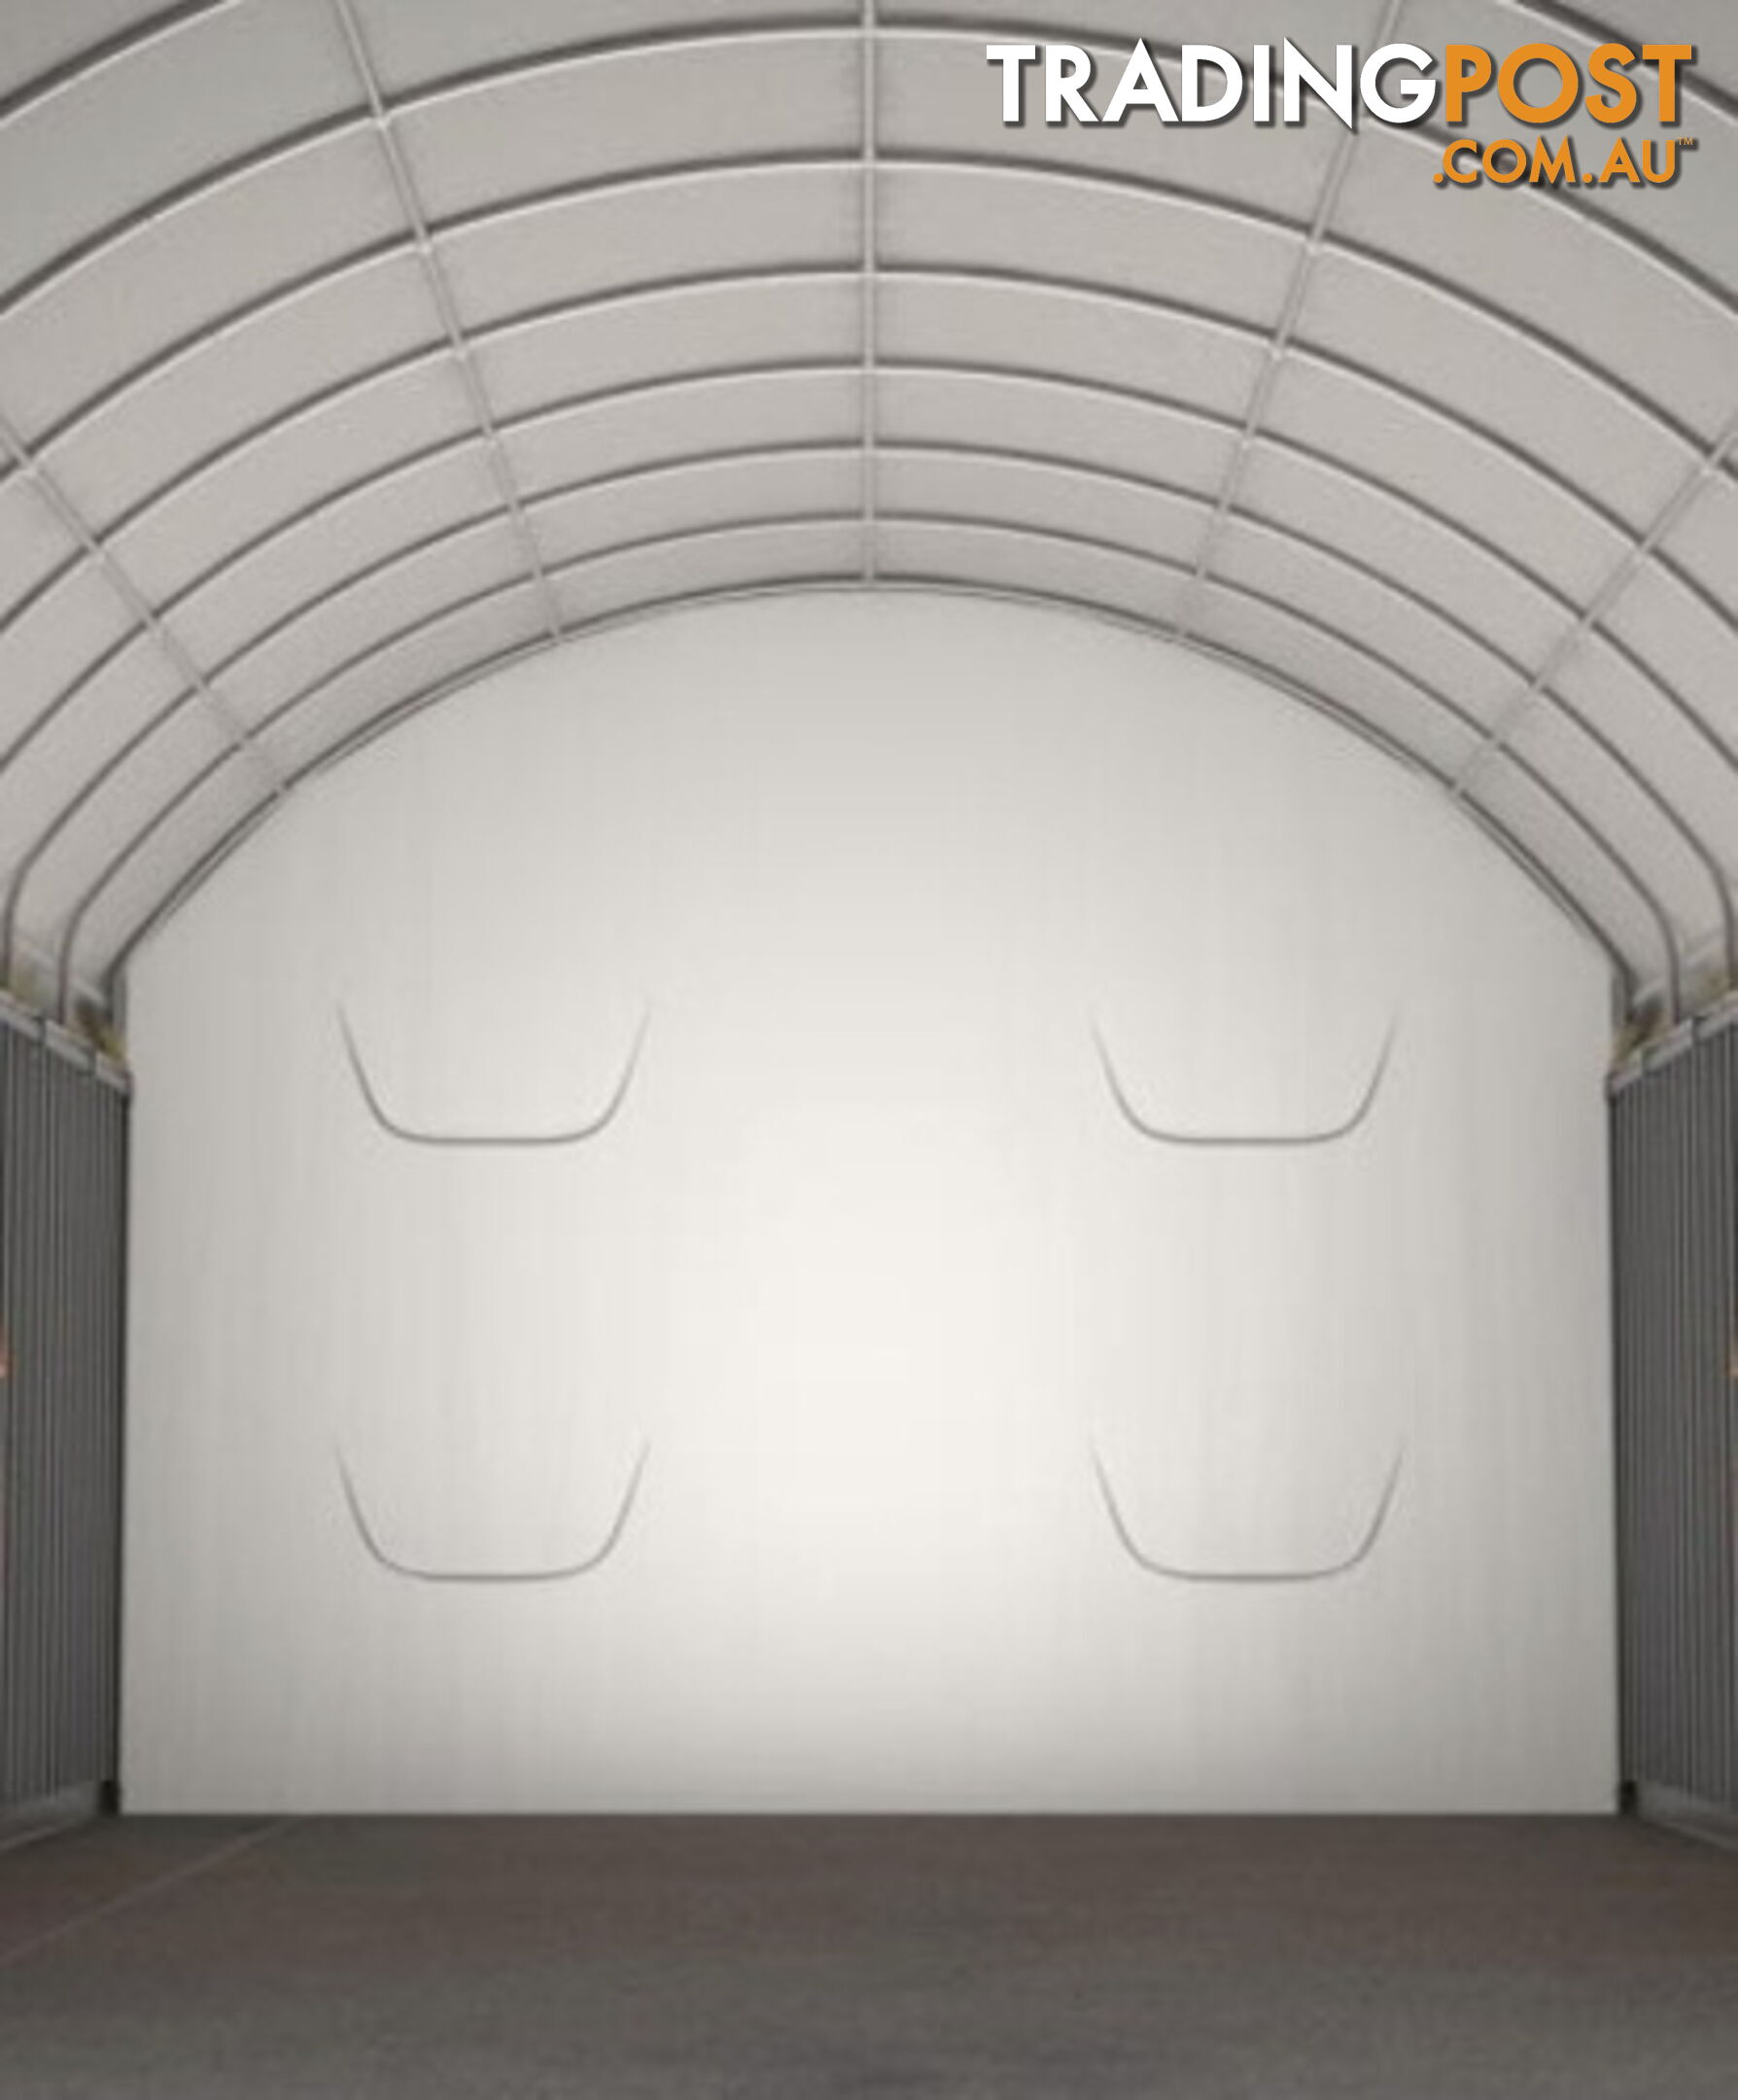 New Rear End Wall for 6m wide Container Shelter Dome